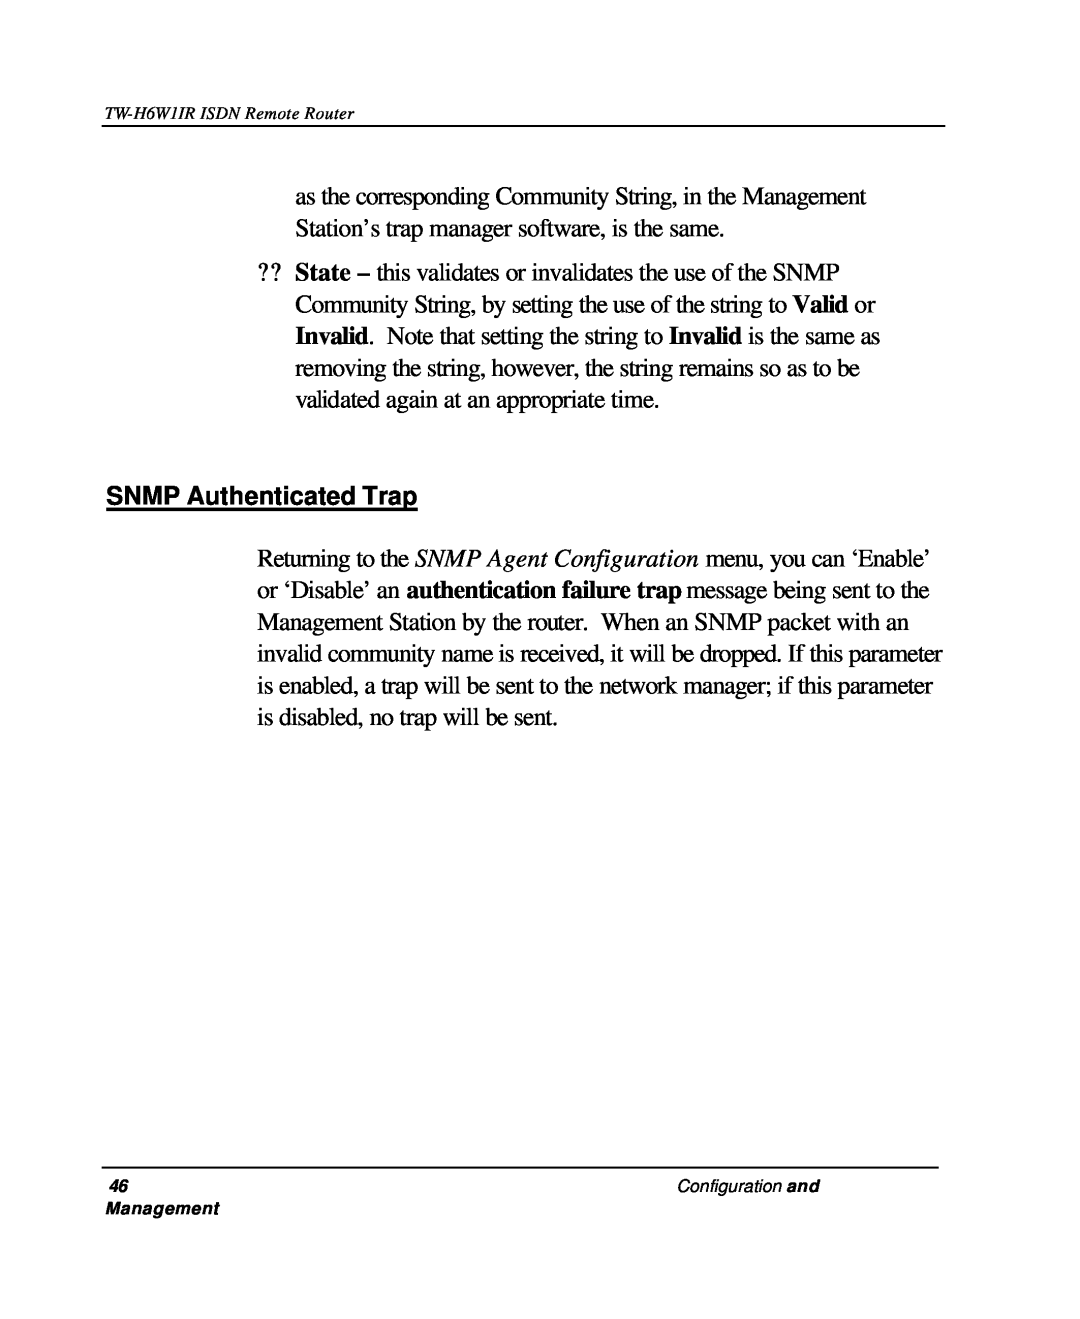 TRENDnet TW-H6W1IR manual SNMP Authenticated Trap 